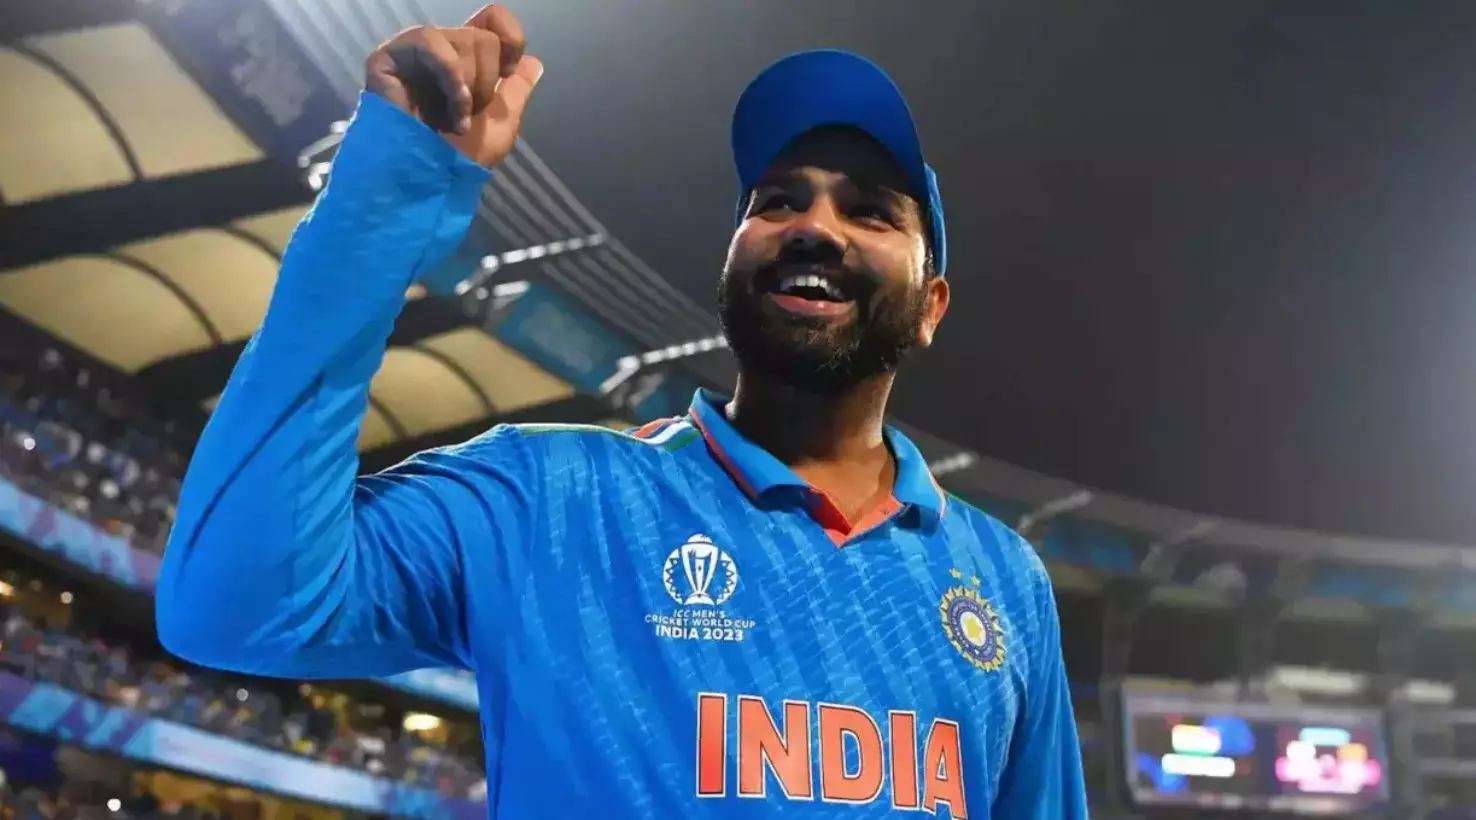 Rohit Sharma creates history in T20, becomes only Indian player to do so